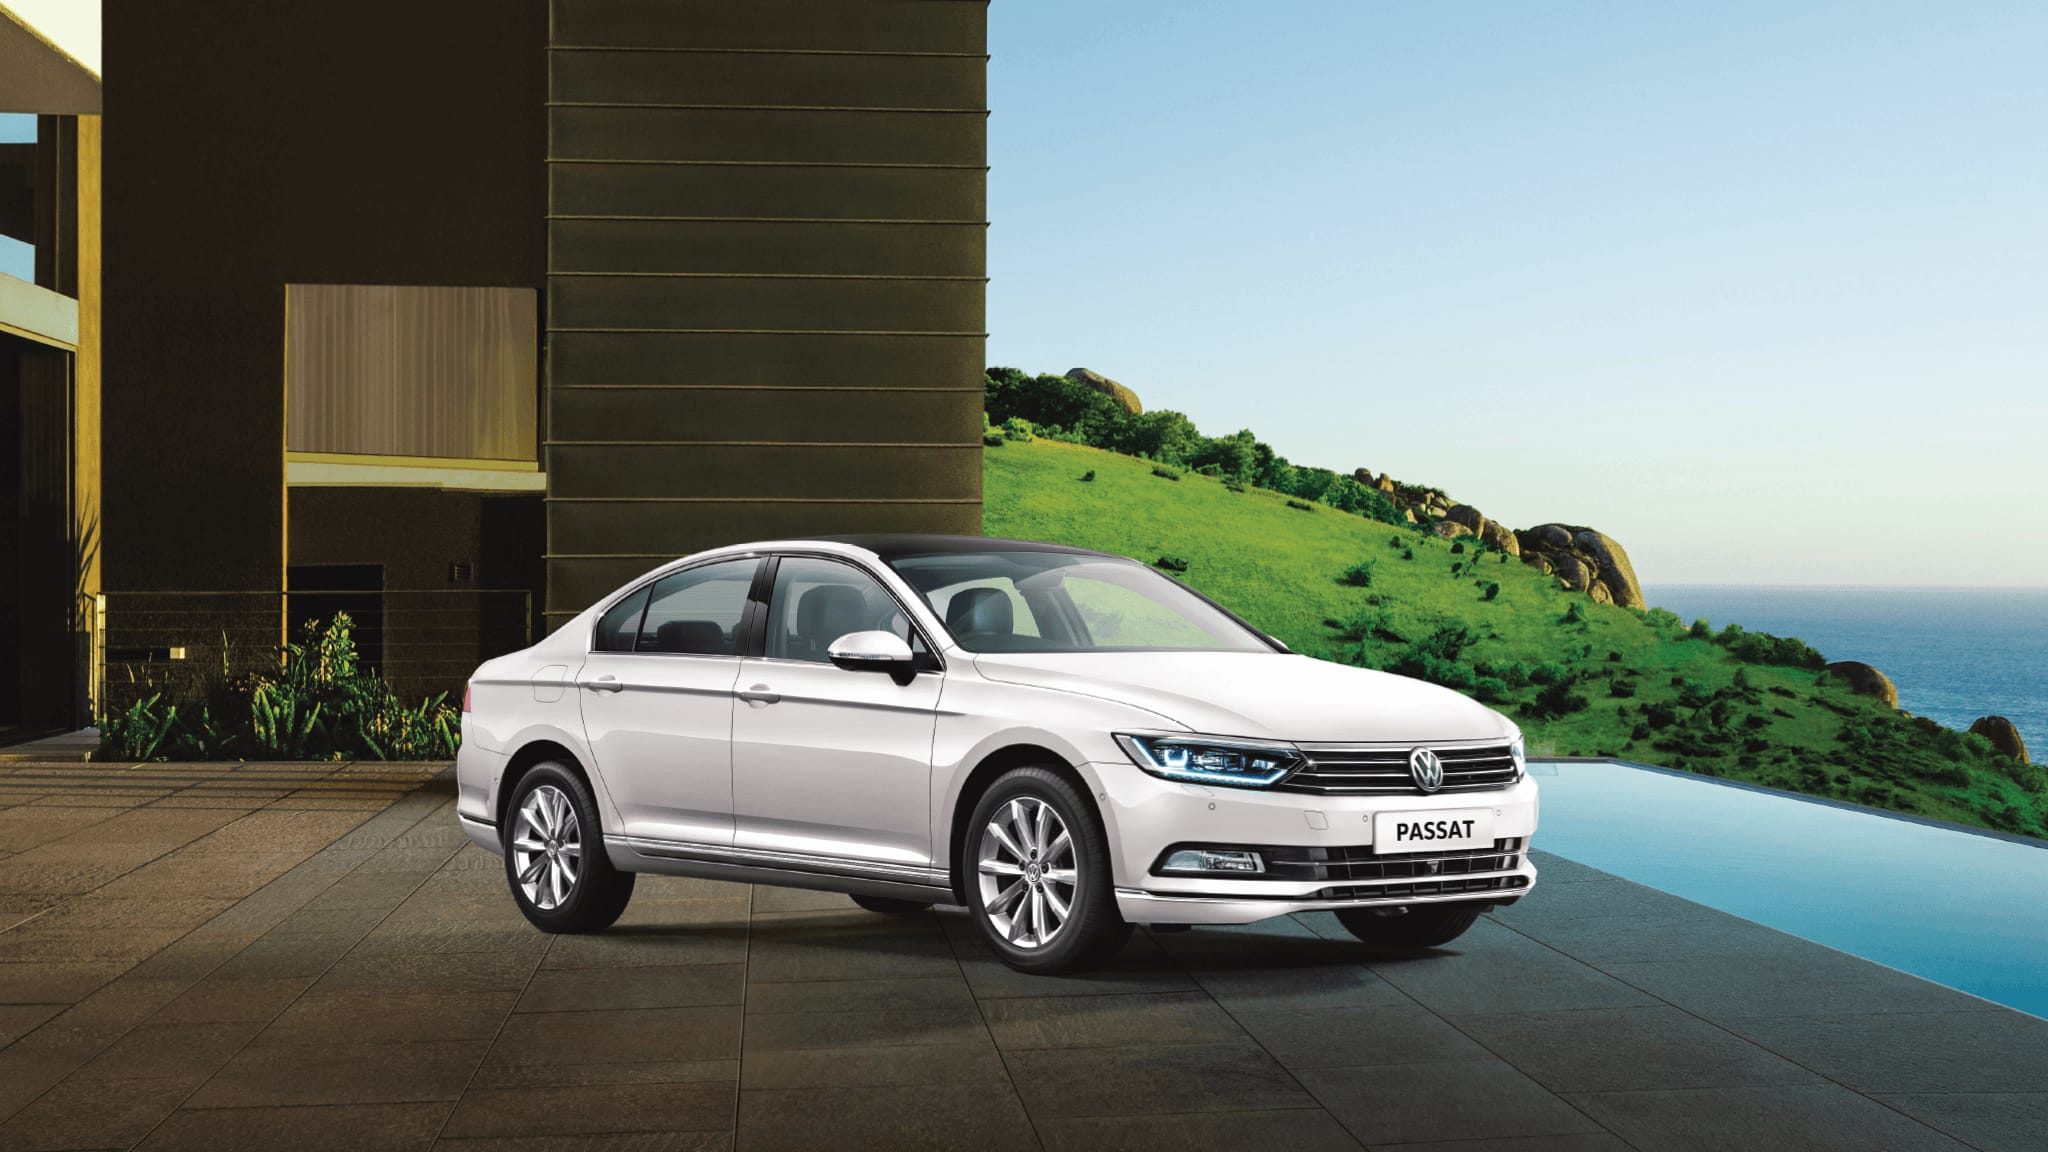 Time to Upgrade to Passat the new sedan on roads